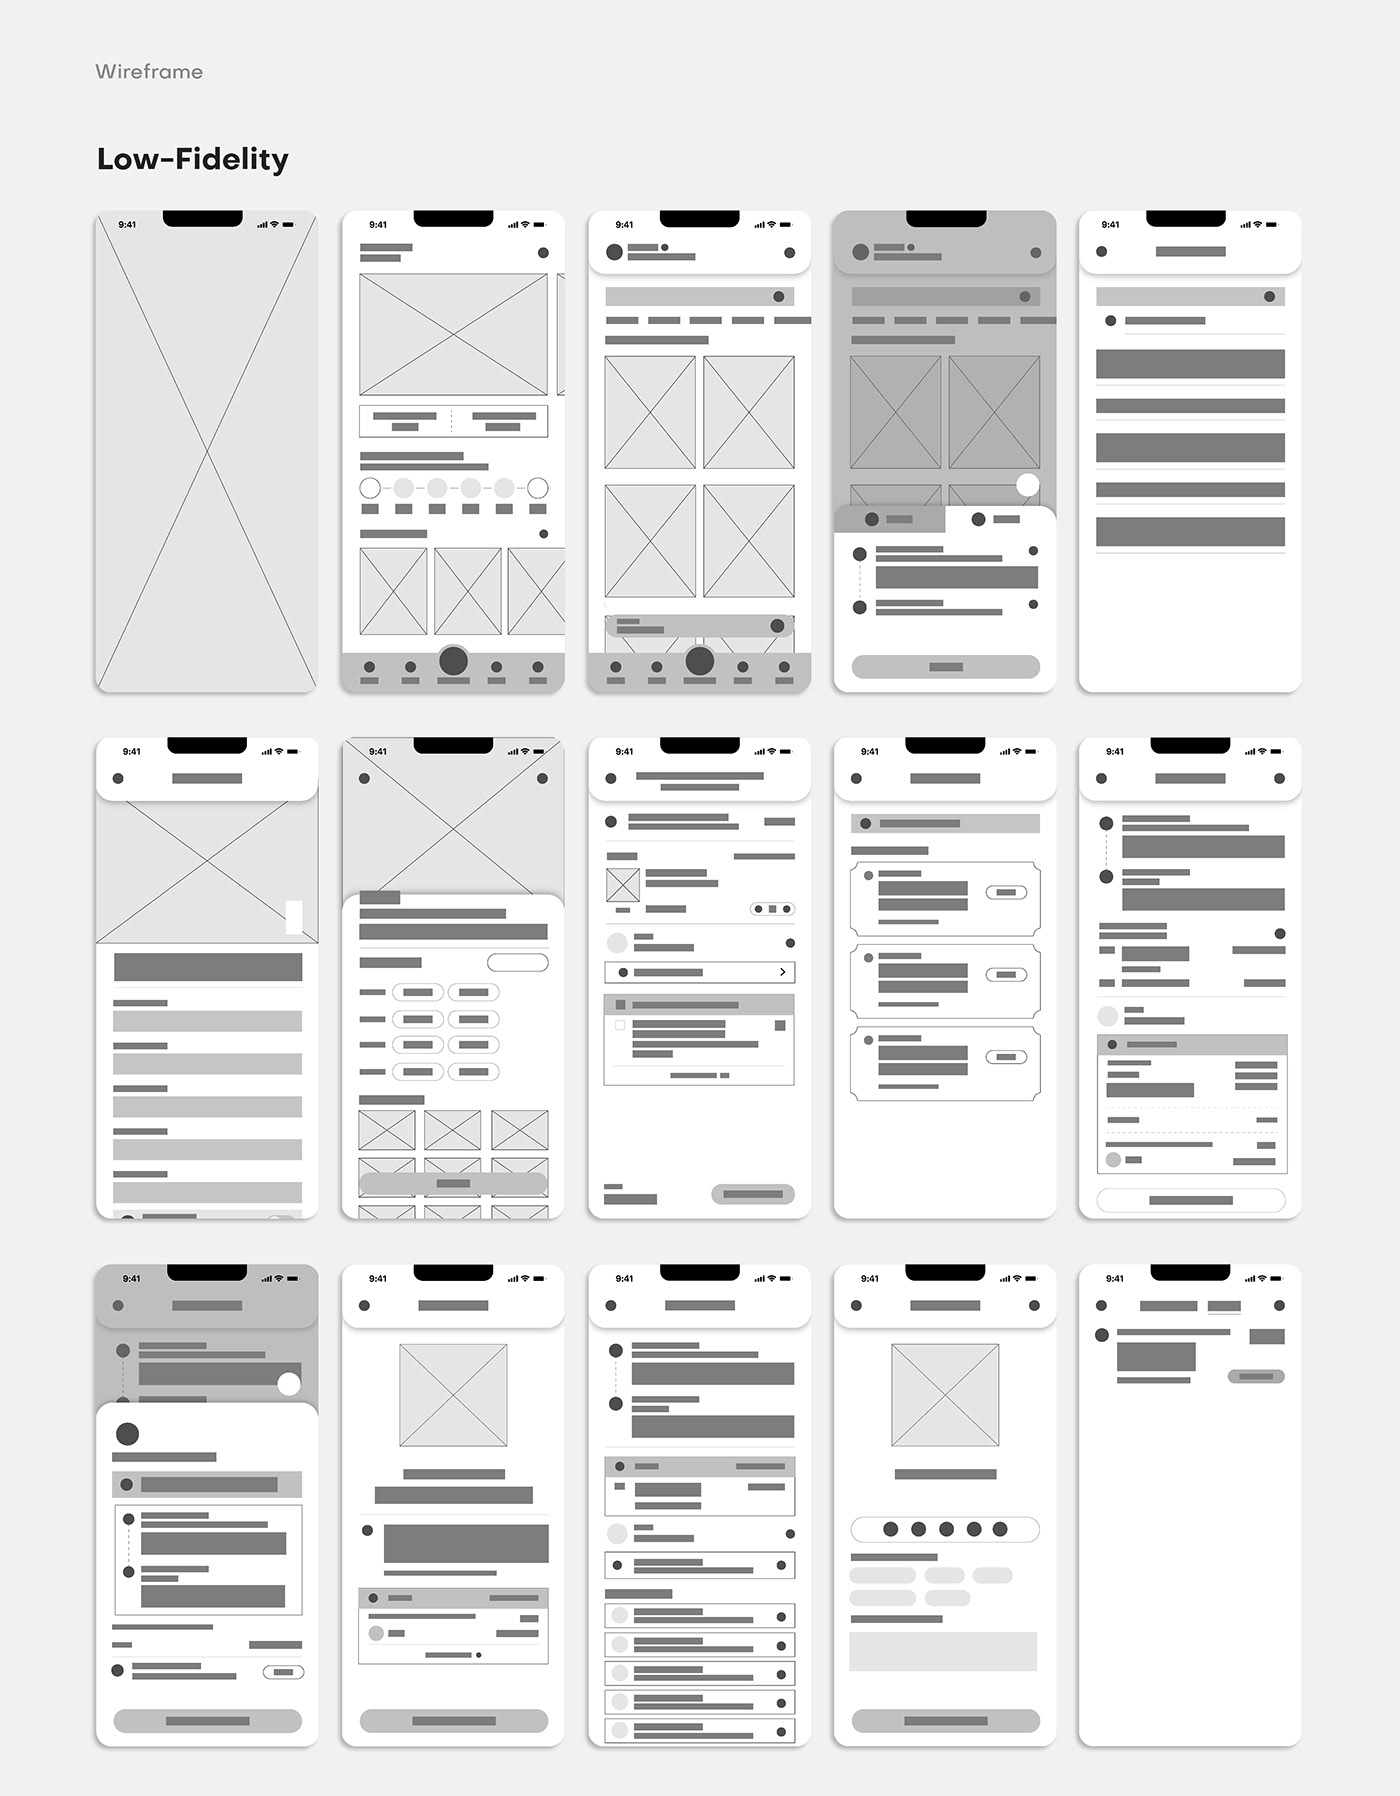 application Interface redesign study case UI uiux uiuxdesign user experience user interface ux